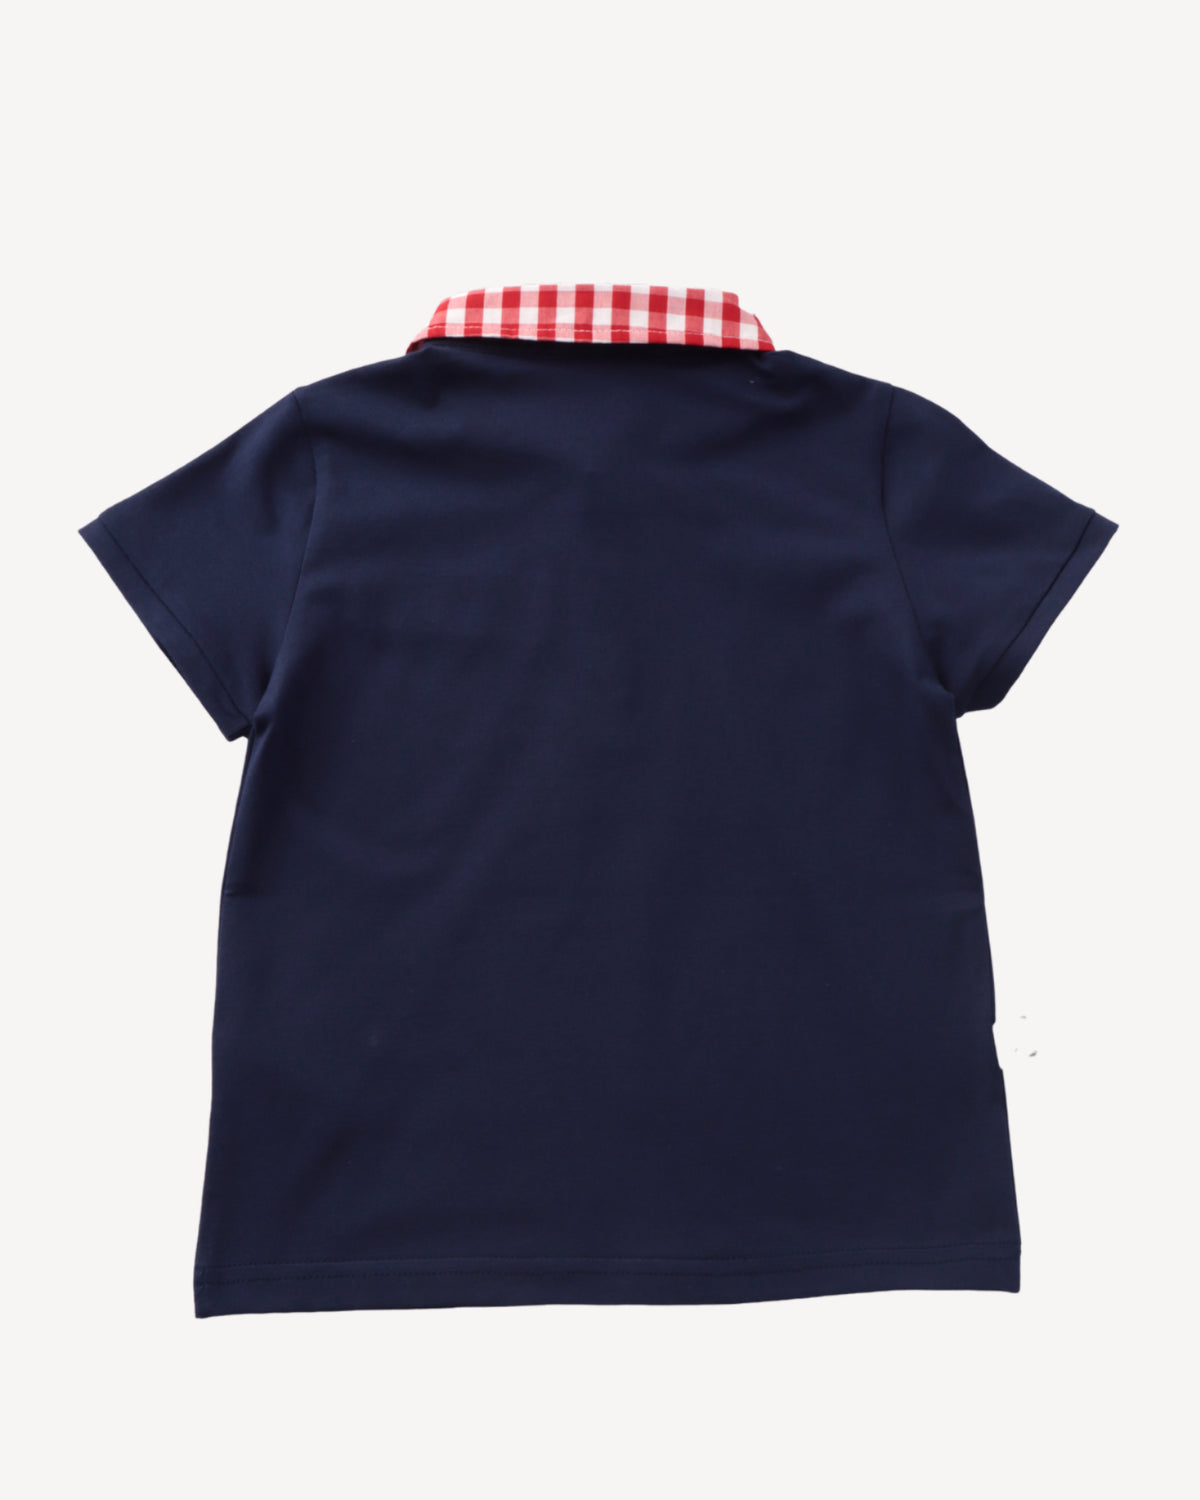 Red Gingham Trim Polo Tee In Navy